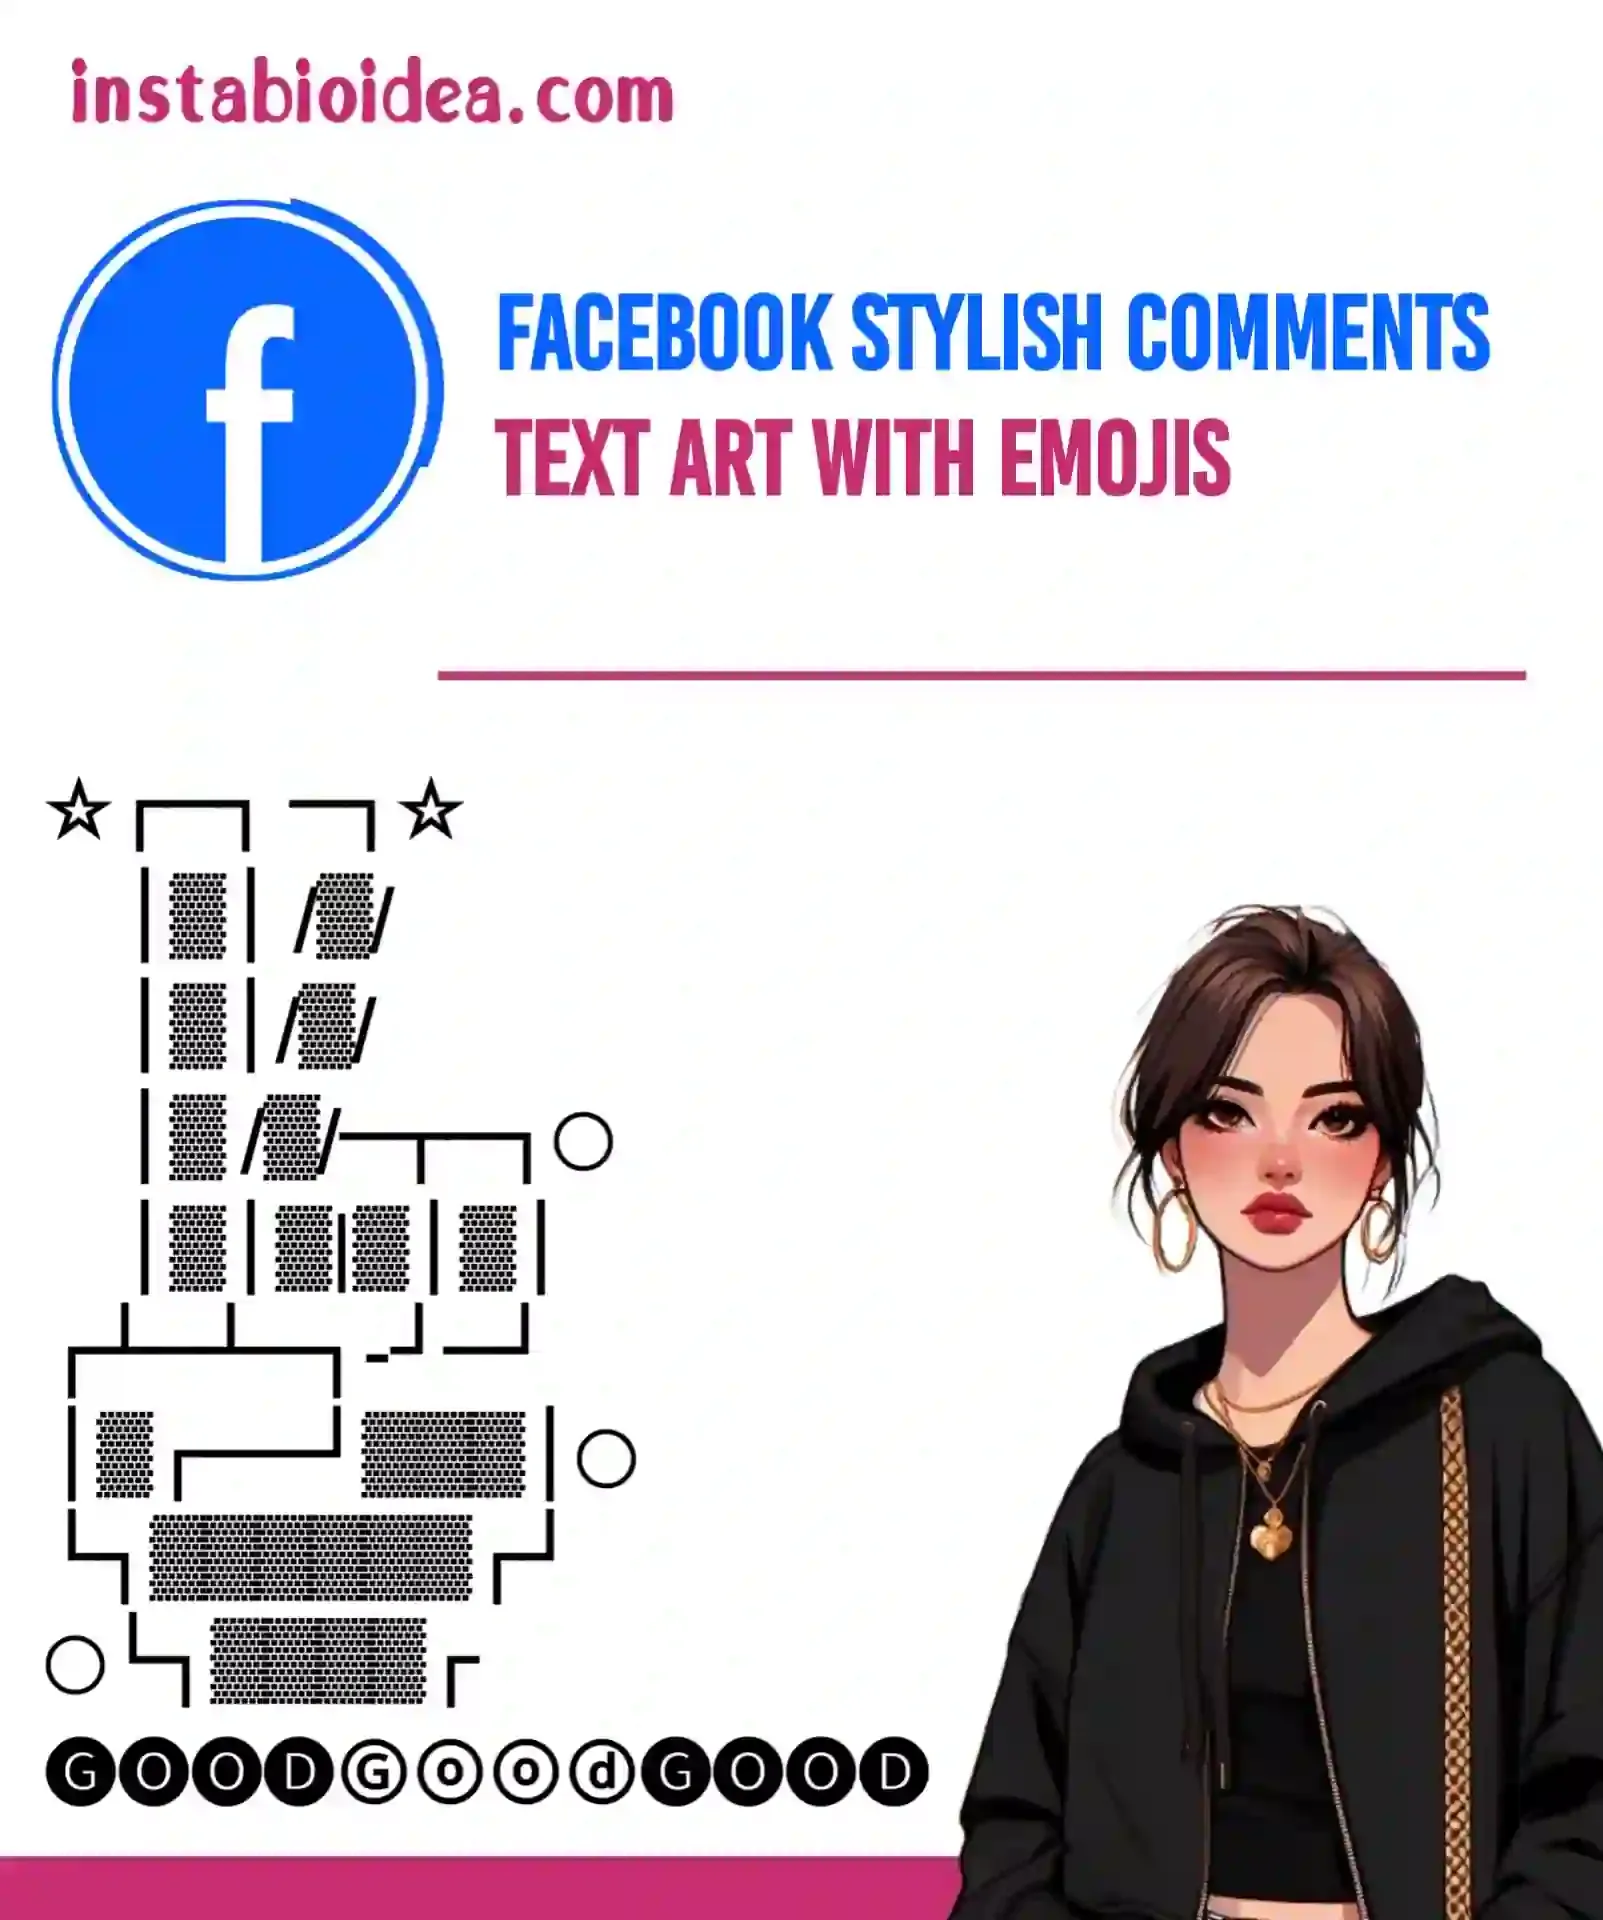 facebook stylish comments text art with emojis image